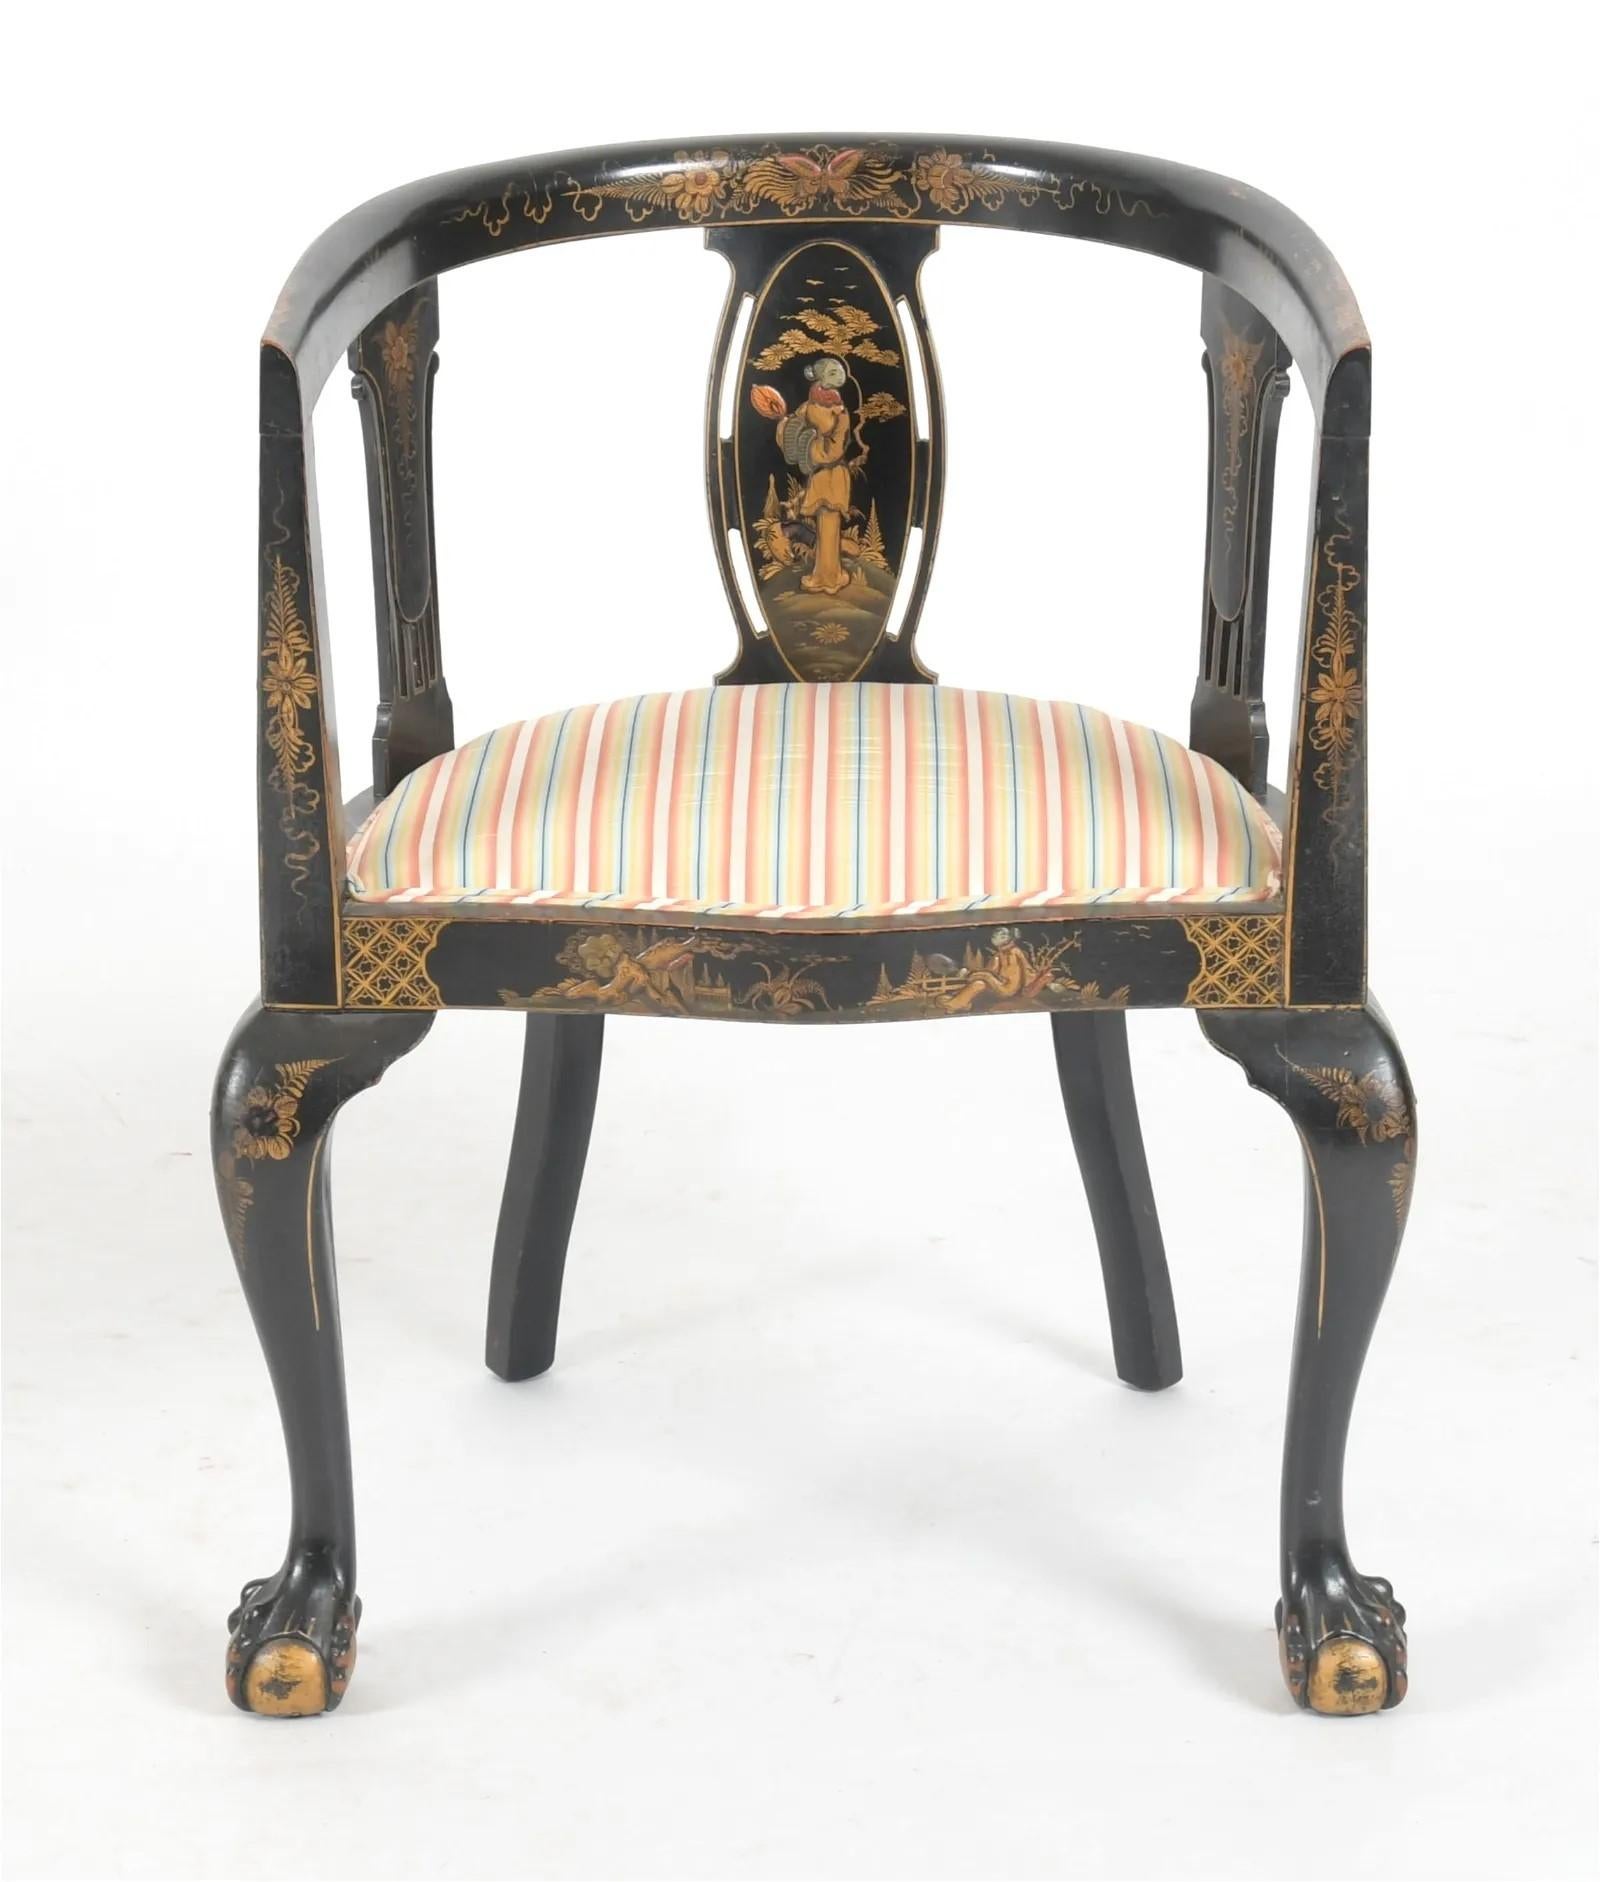 Beautiful pair of Chinoiserie Japanned gilt ebonized accent armchairs, Early 20th Century.  Curved rounded barrel back frames feature hand painted detailed scenes, classic ball and claw feet, and upholstered seats.  

